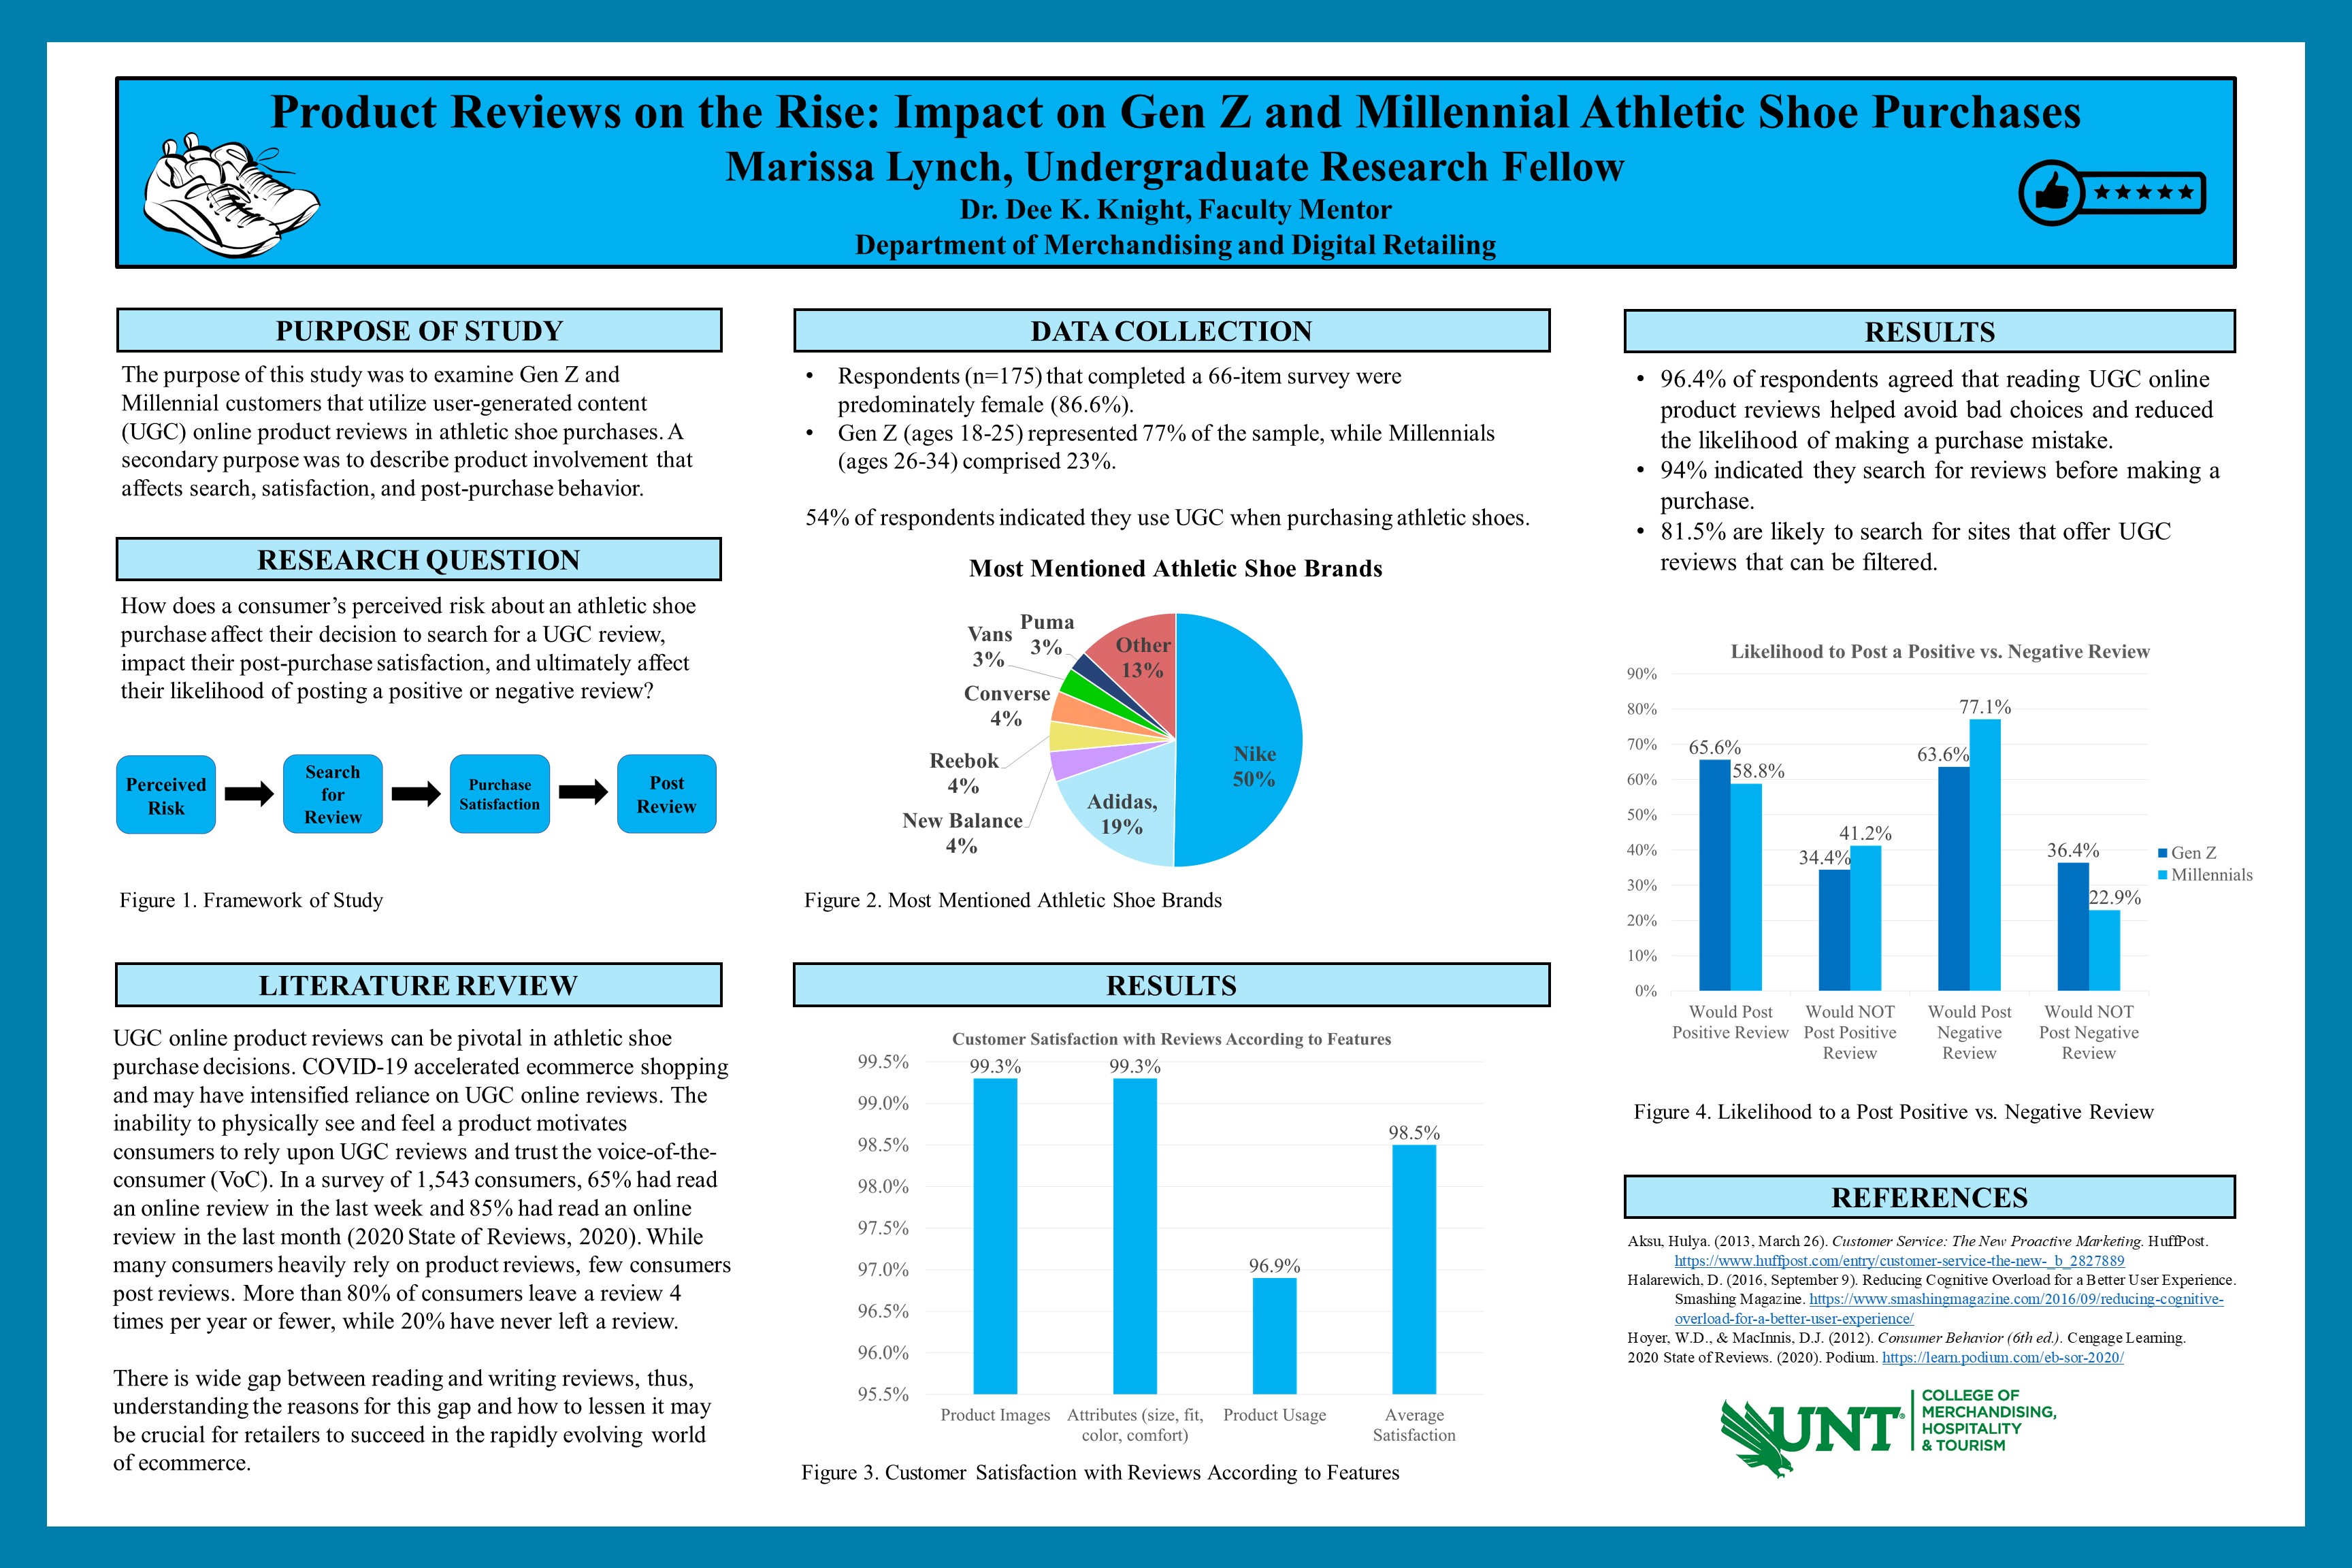 Product Reviews on the Rise: Impact on Gen Z and Millennial’s Athletic Shoe Purchases